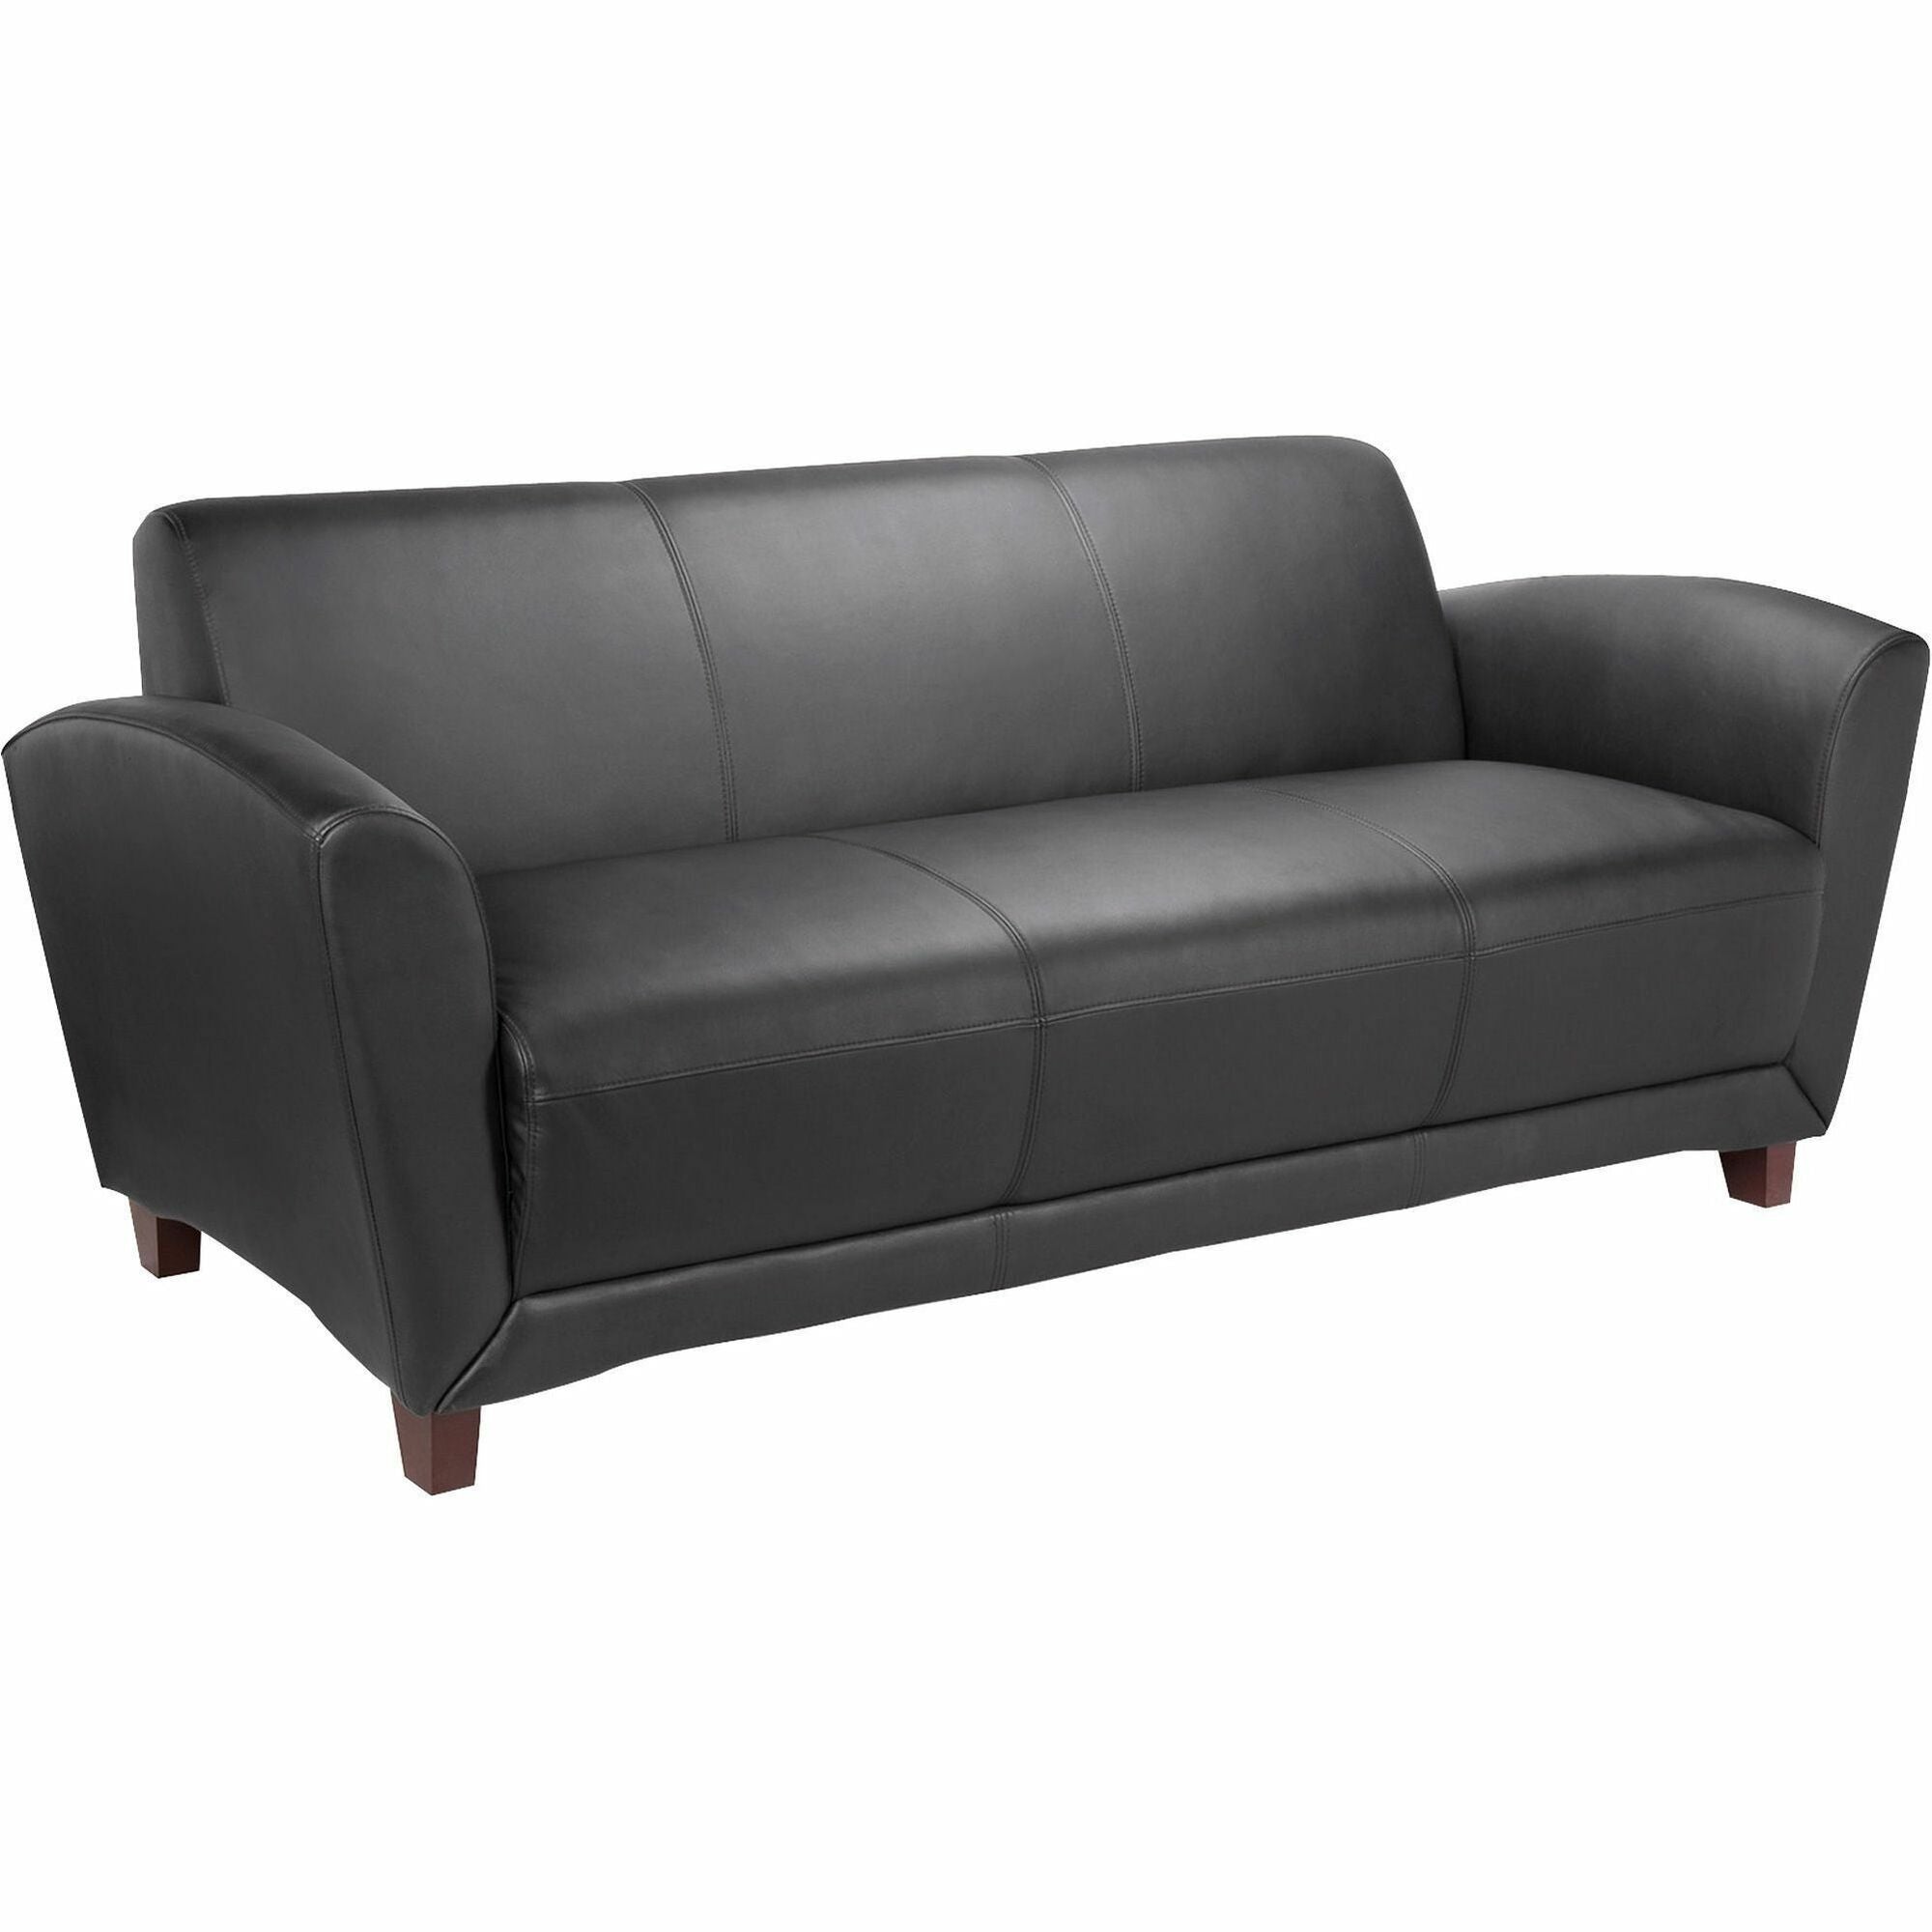 Lorell Accession Reception Sofa - 75" x 34.5" x 31.3" - Leather Black Seat - Leather Black Back - 1 Each - 